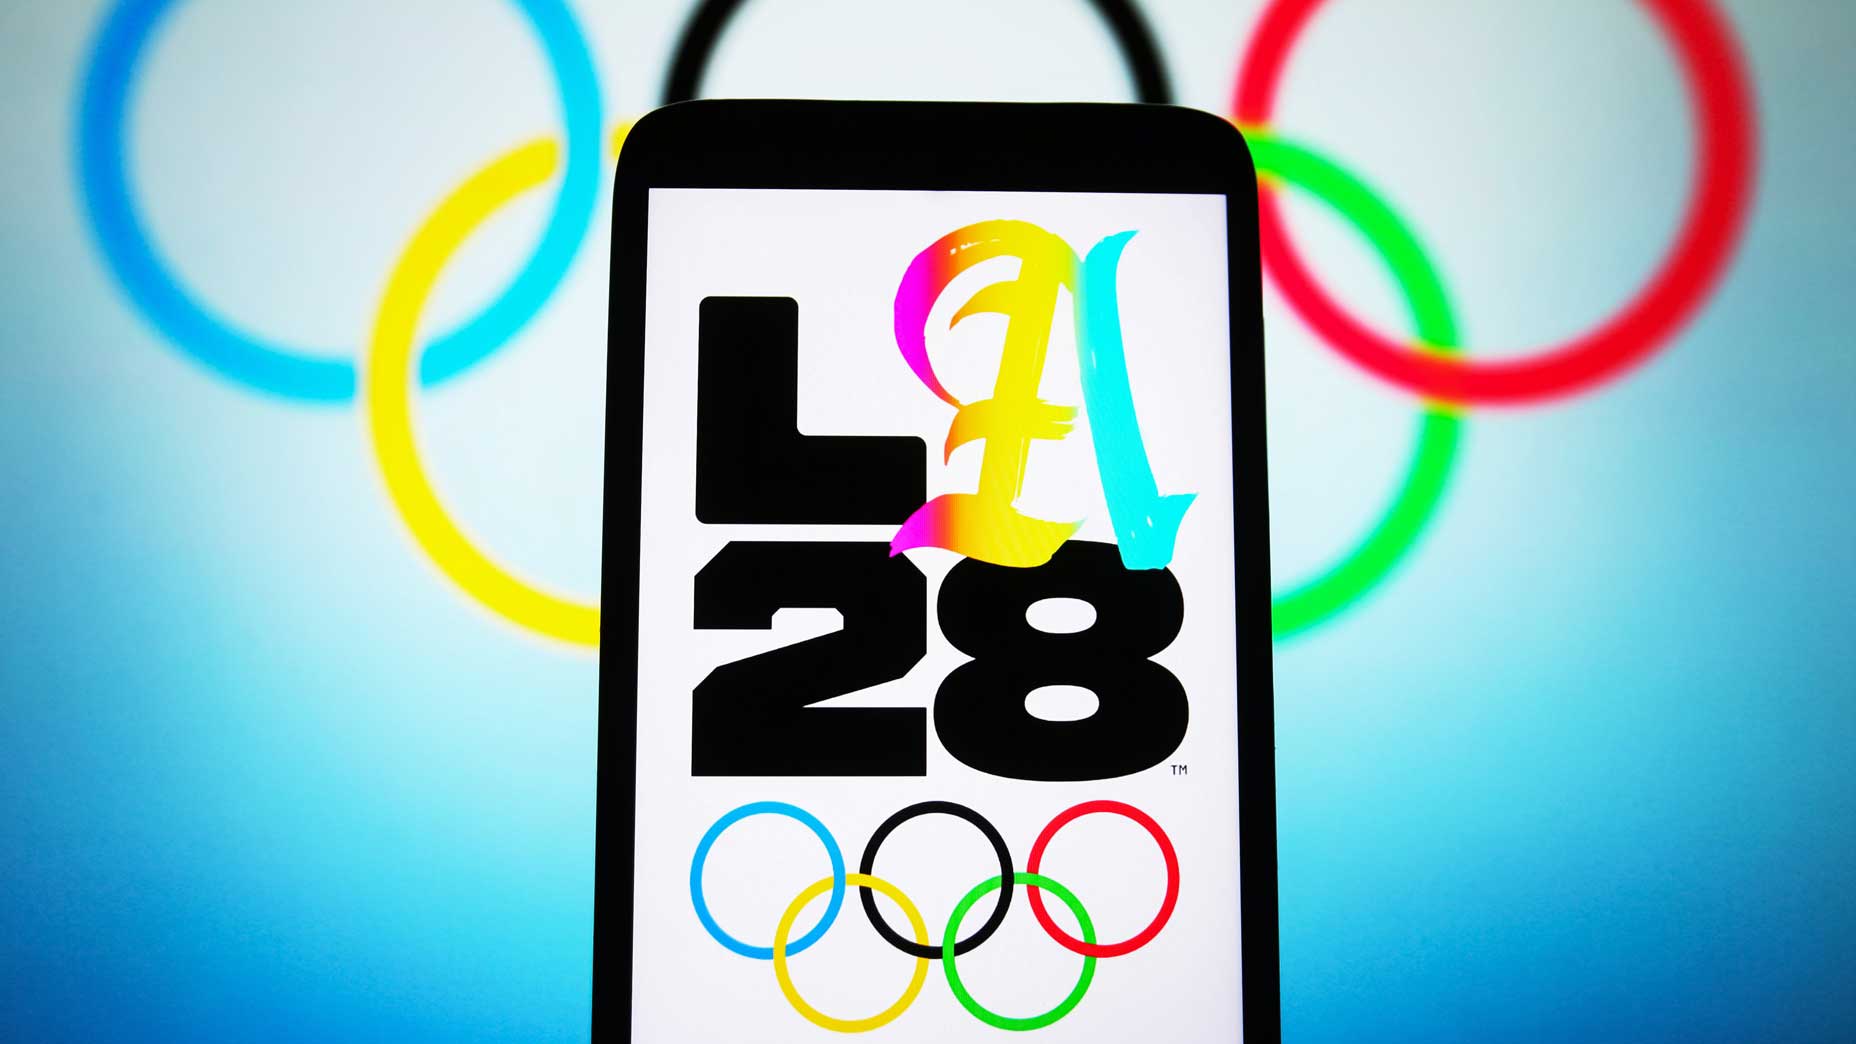 An artistic rendering of the 2028 LA Olympics logo on a smartphone